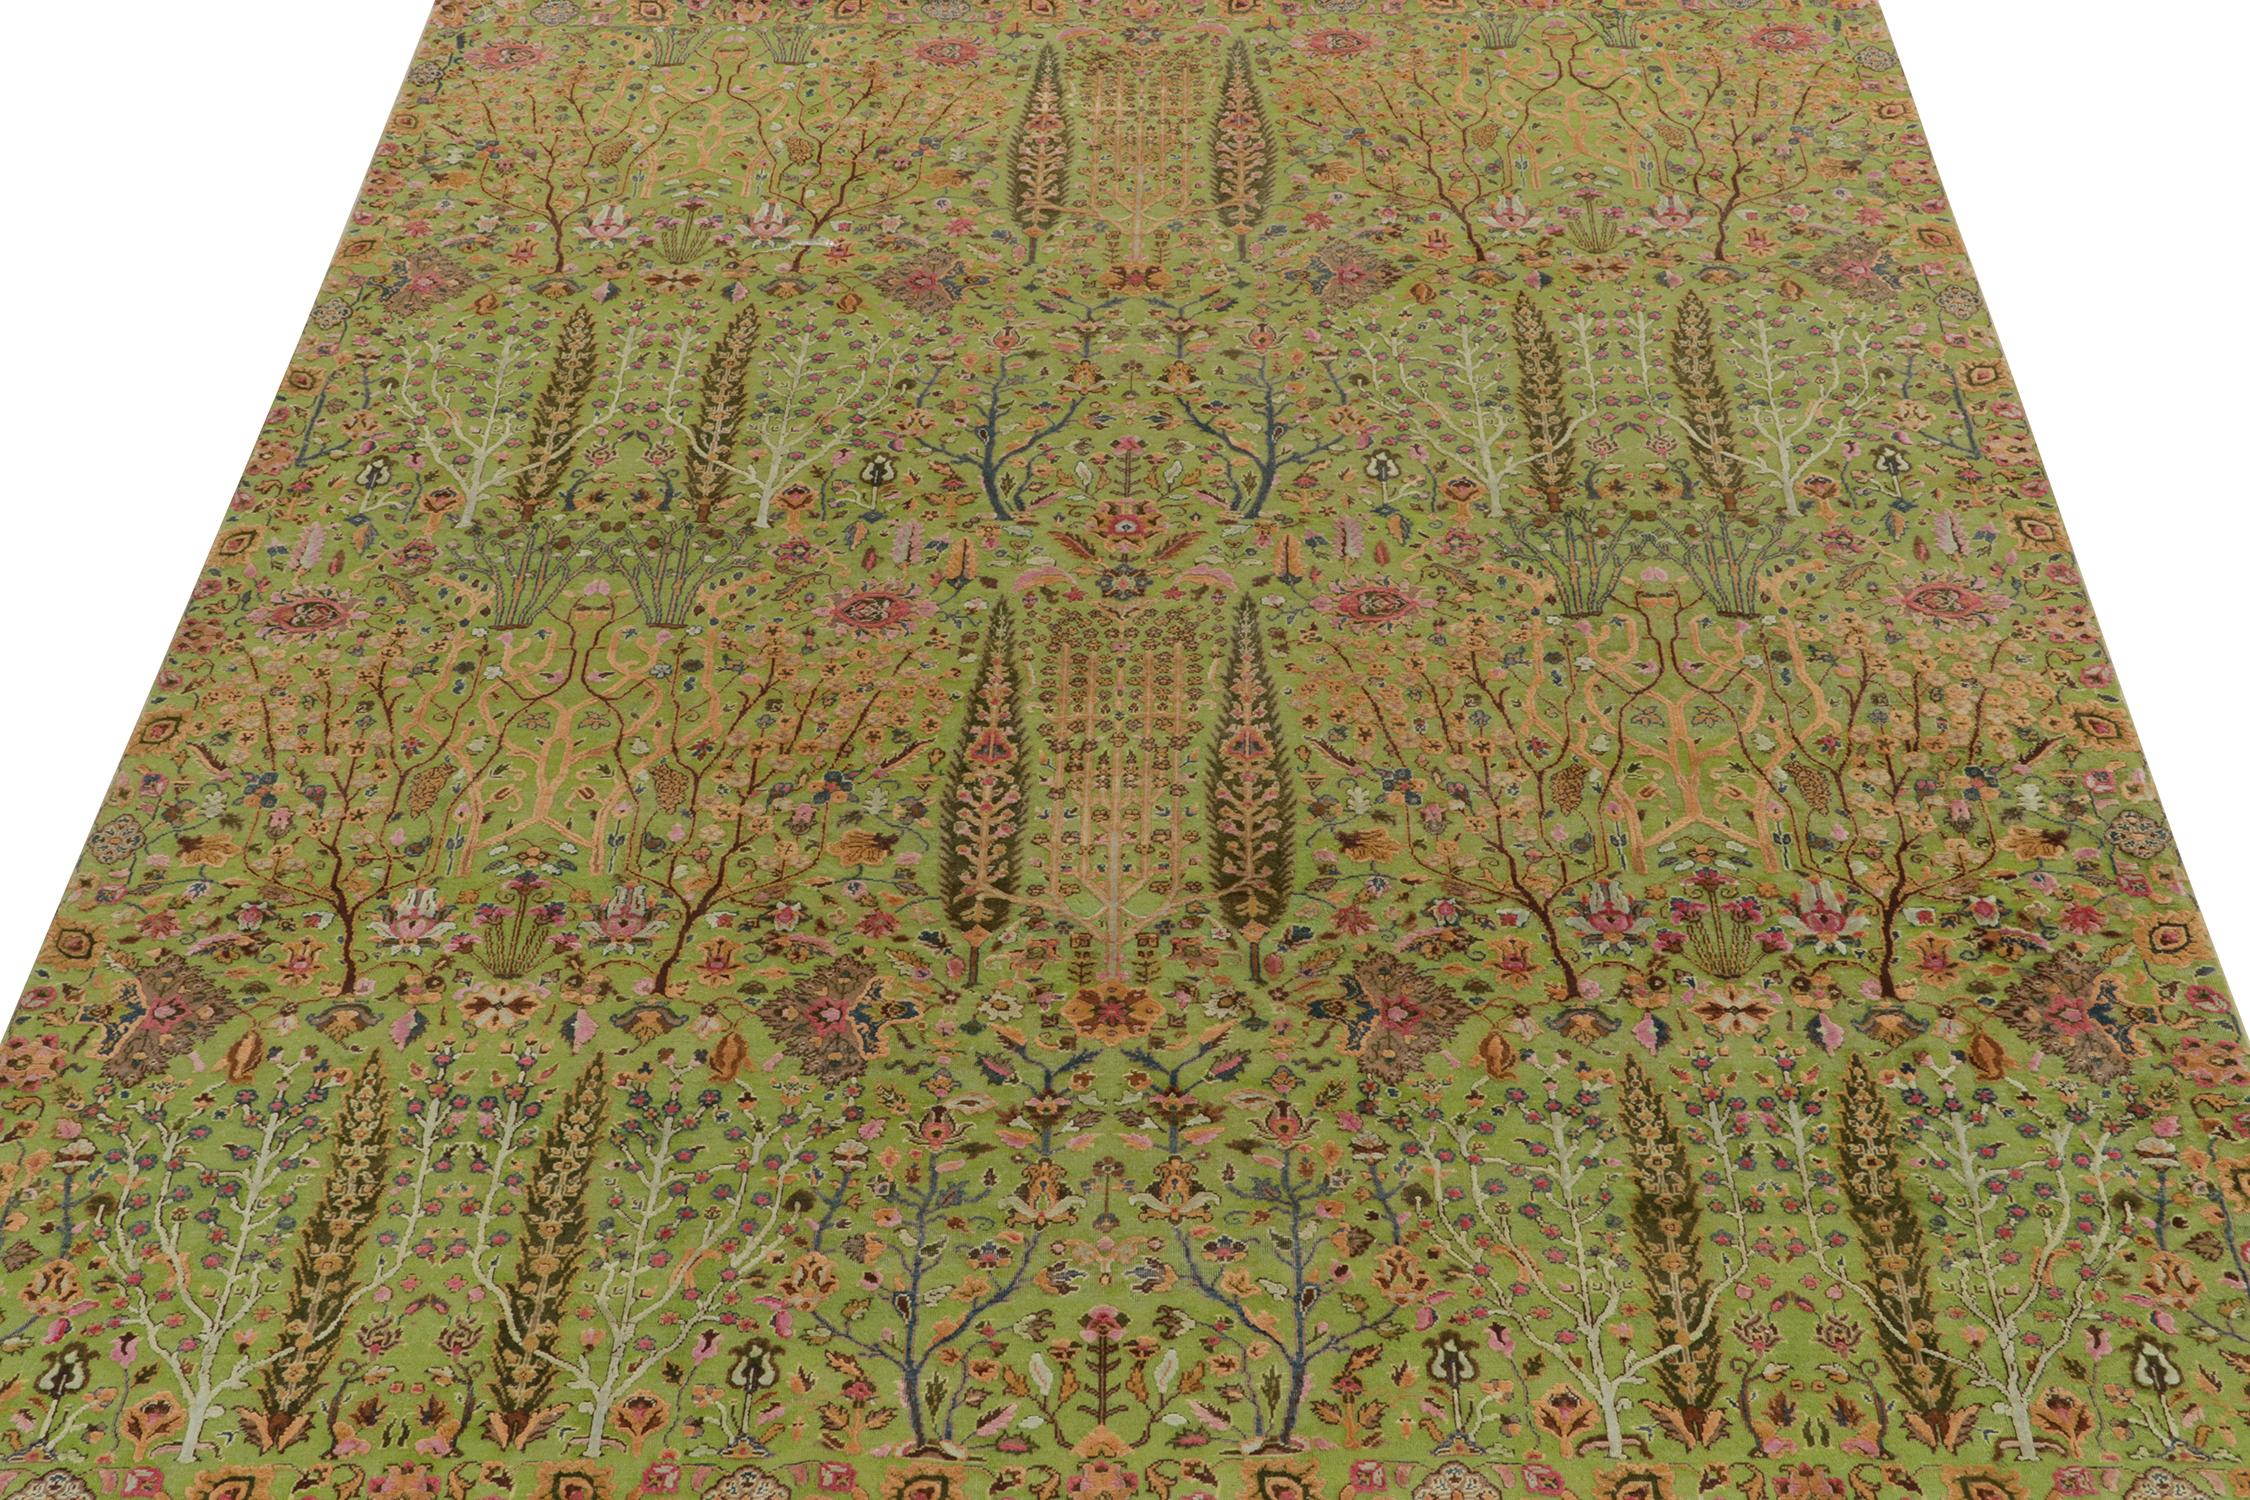 Indian Rug & Kilim’s Classic Style Rug in Green, Pink, Brown Floral Pattern For Sale